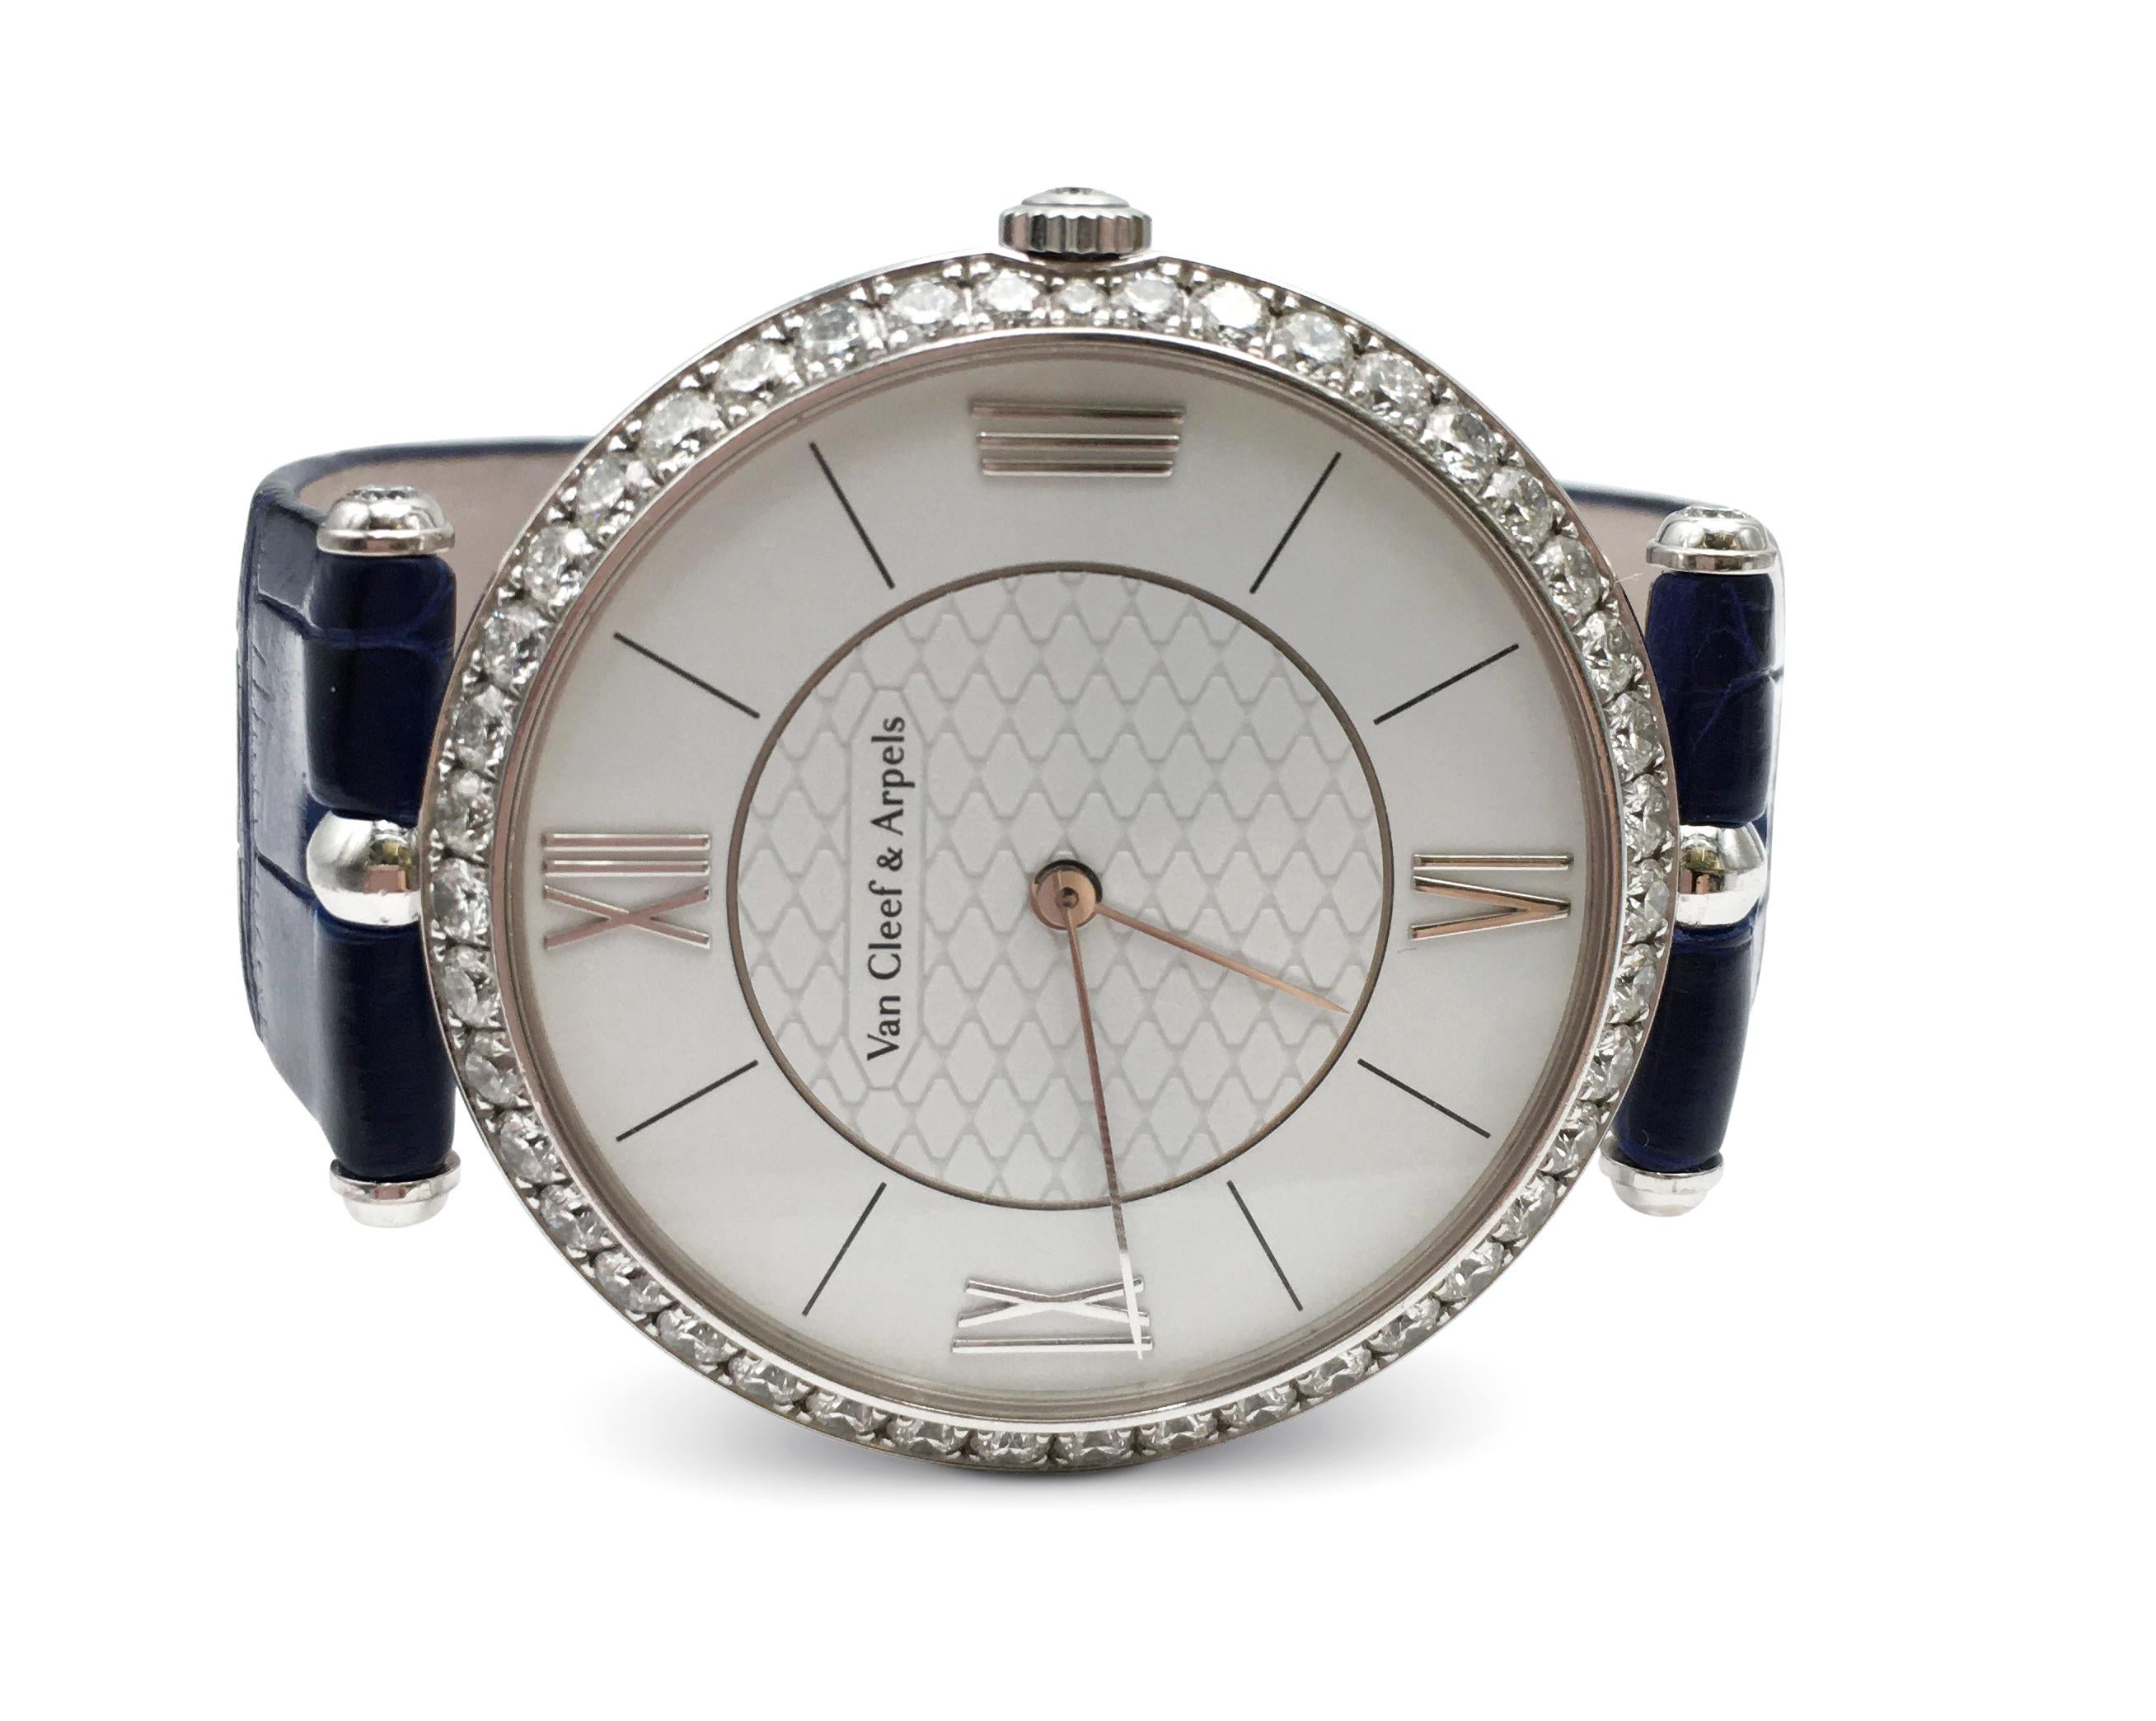 Authentic sophisticated Van Cleef & Arpels watch designed by Pierre Arpels. The watch is crafted in 18 karat white gold and features a thin 38 mm case held by two central attachments. The bezel is set with high-quality round brilliant cut diamonds